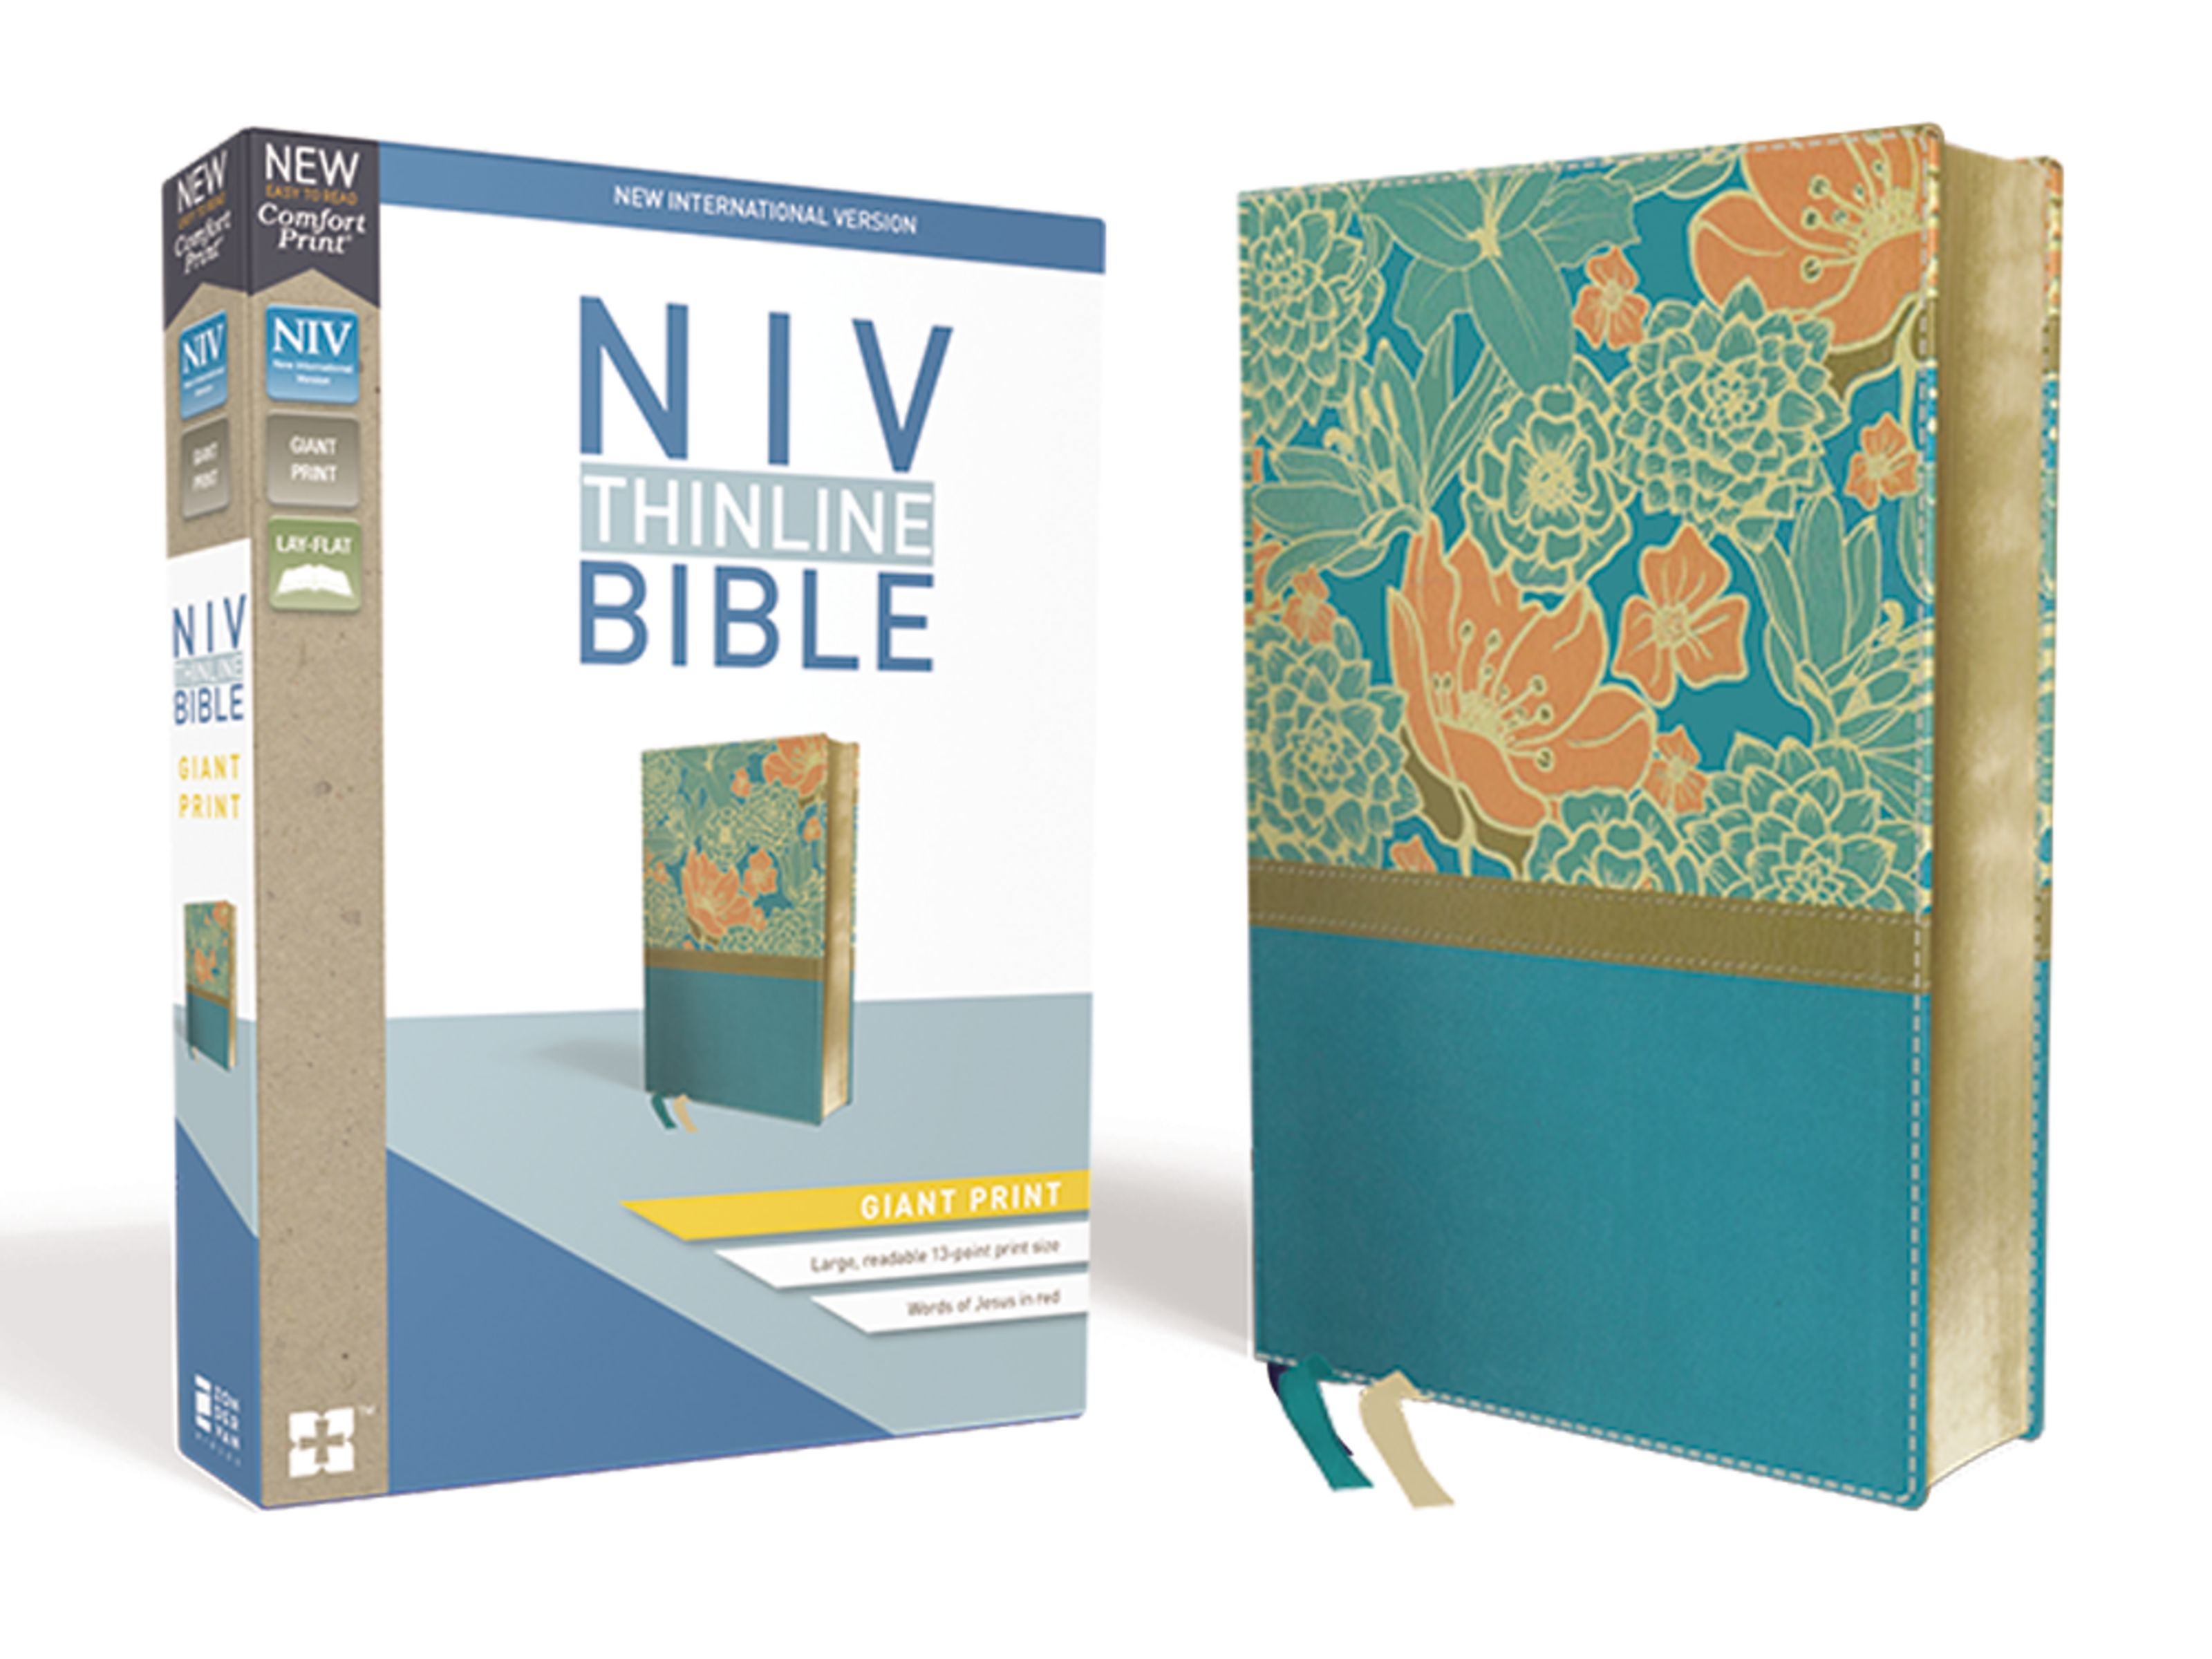 niv-thinline-bible-giant-print-leathersoft-teal-red-letter-comfort-print-free-delivery-at